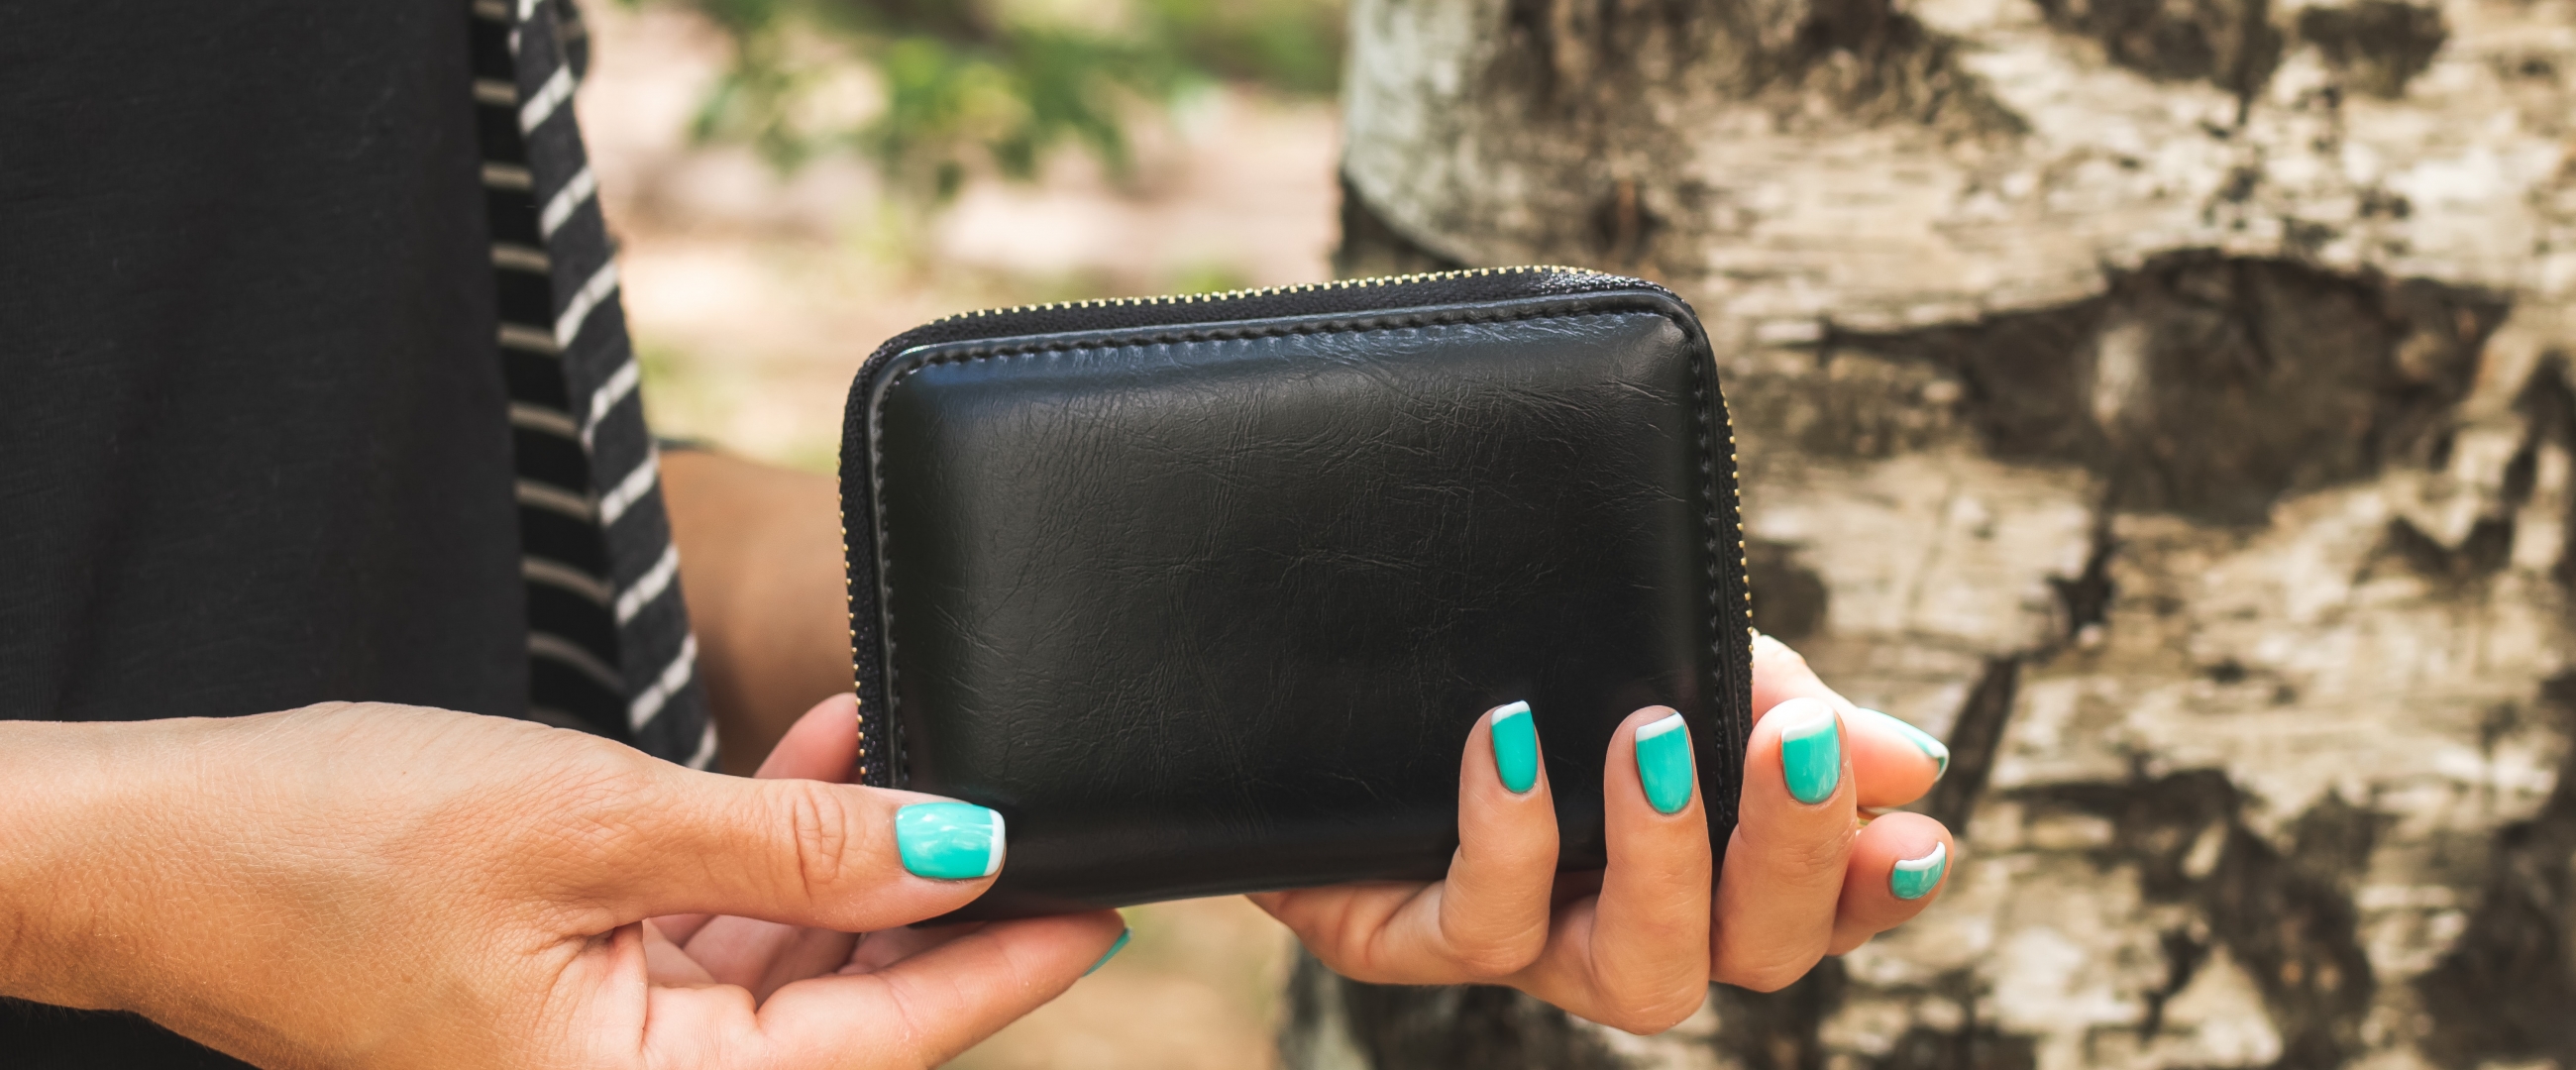 A woman with bright, aqua green nails holds a black leather wallet